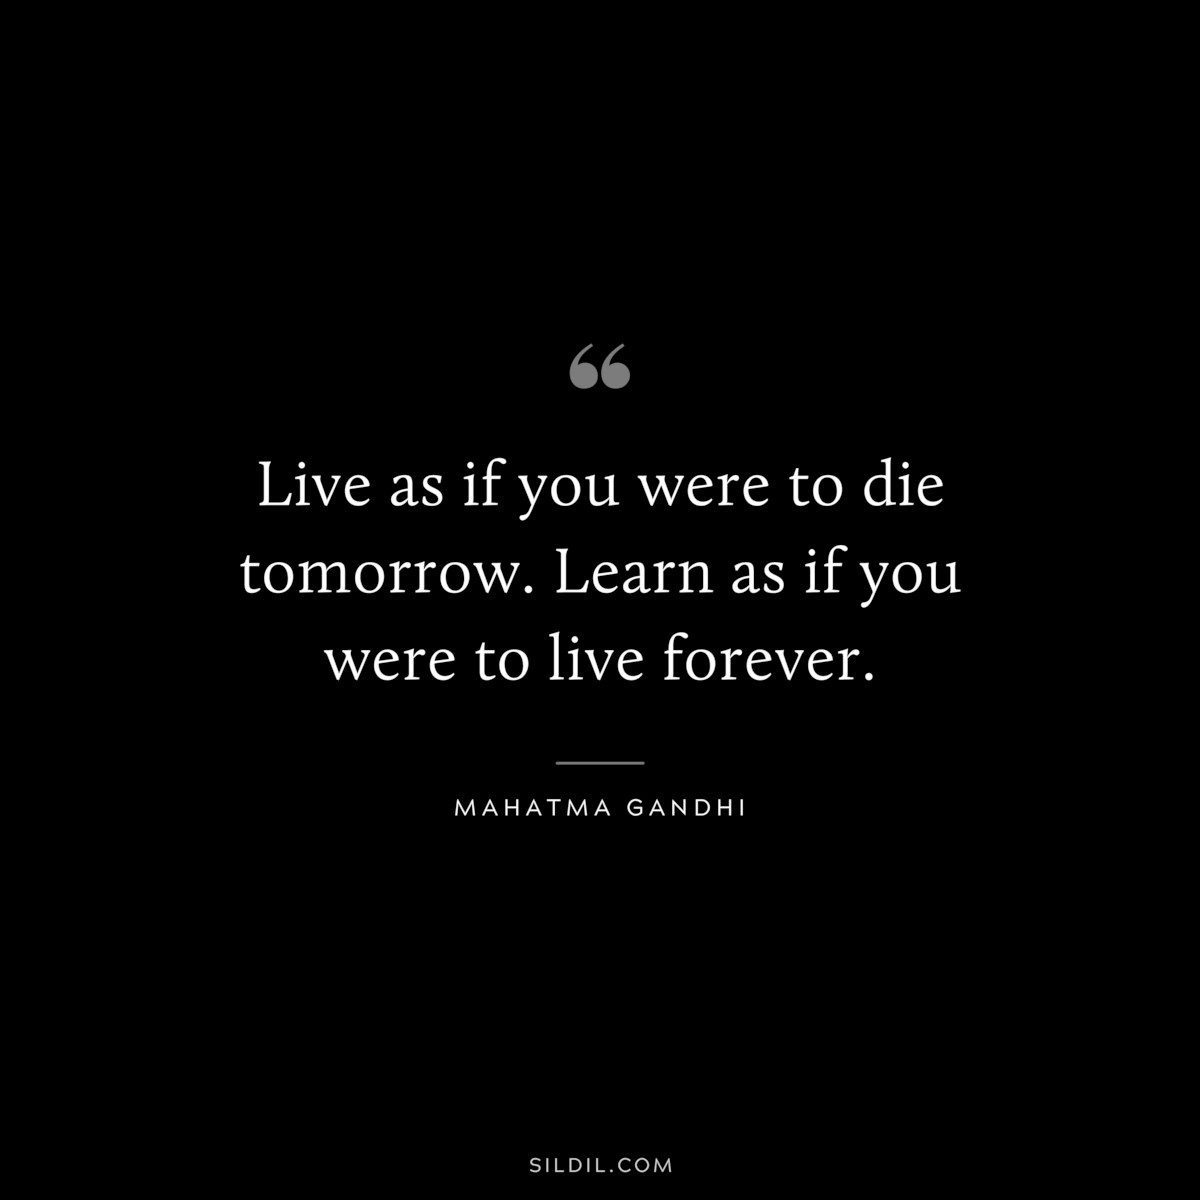 Live as if you were to die tomorrow. Learn as if you were to live forever. ― Mahatma Gandhi